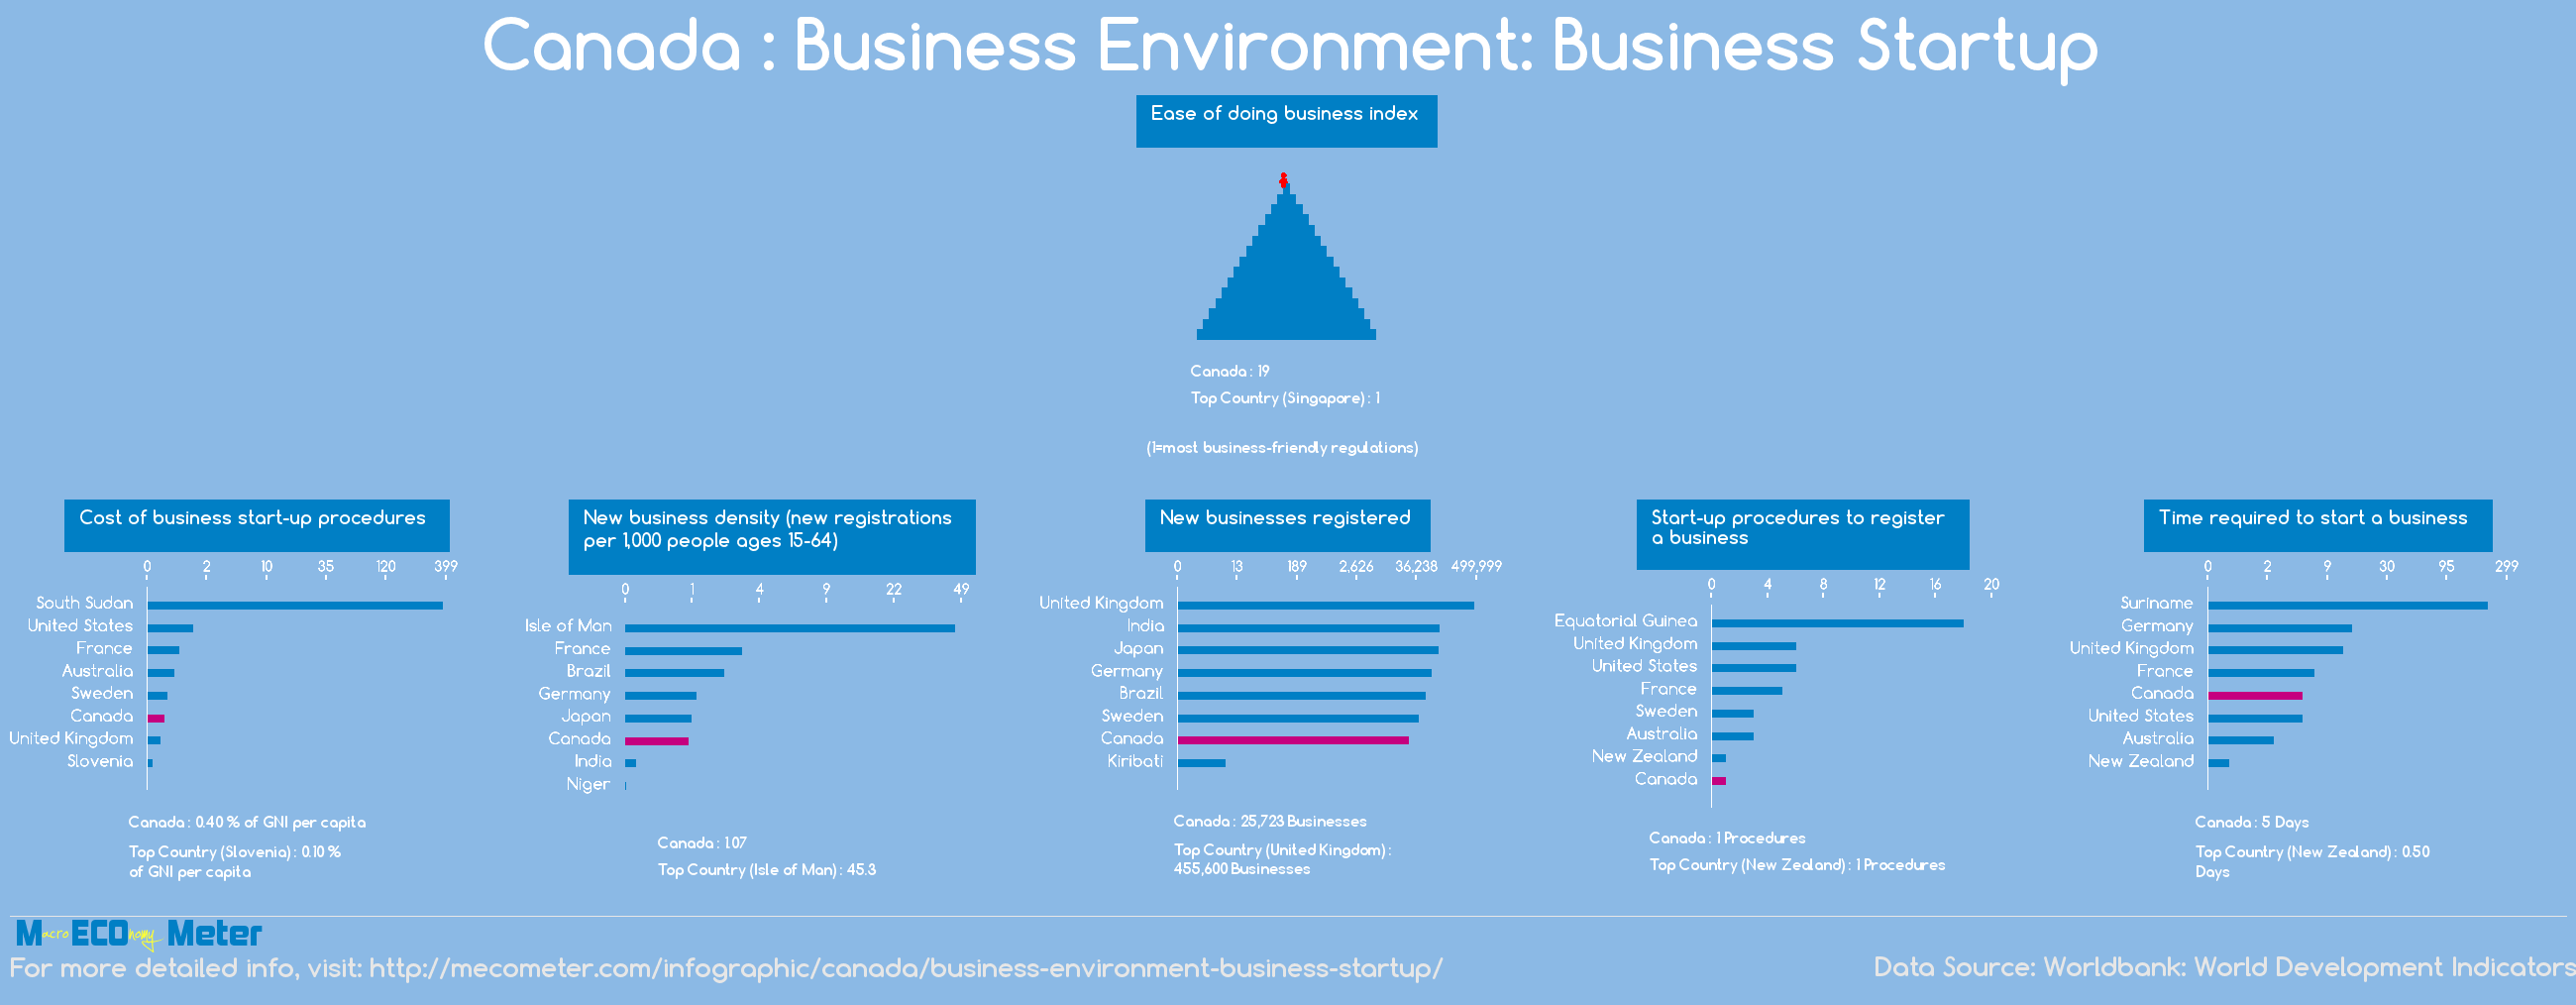 Canada : Business Environment: Business Startup